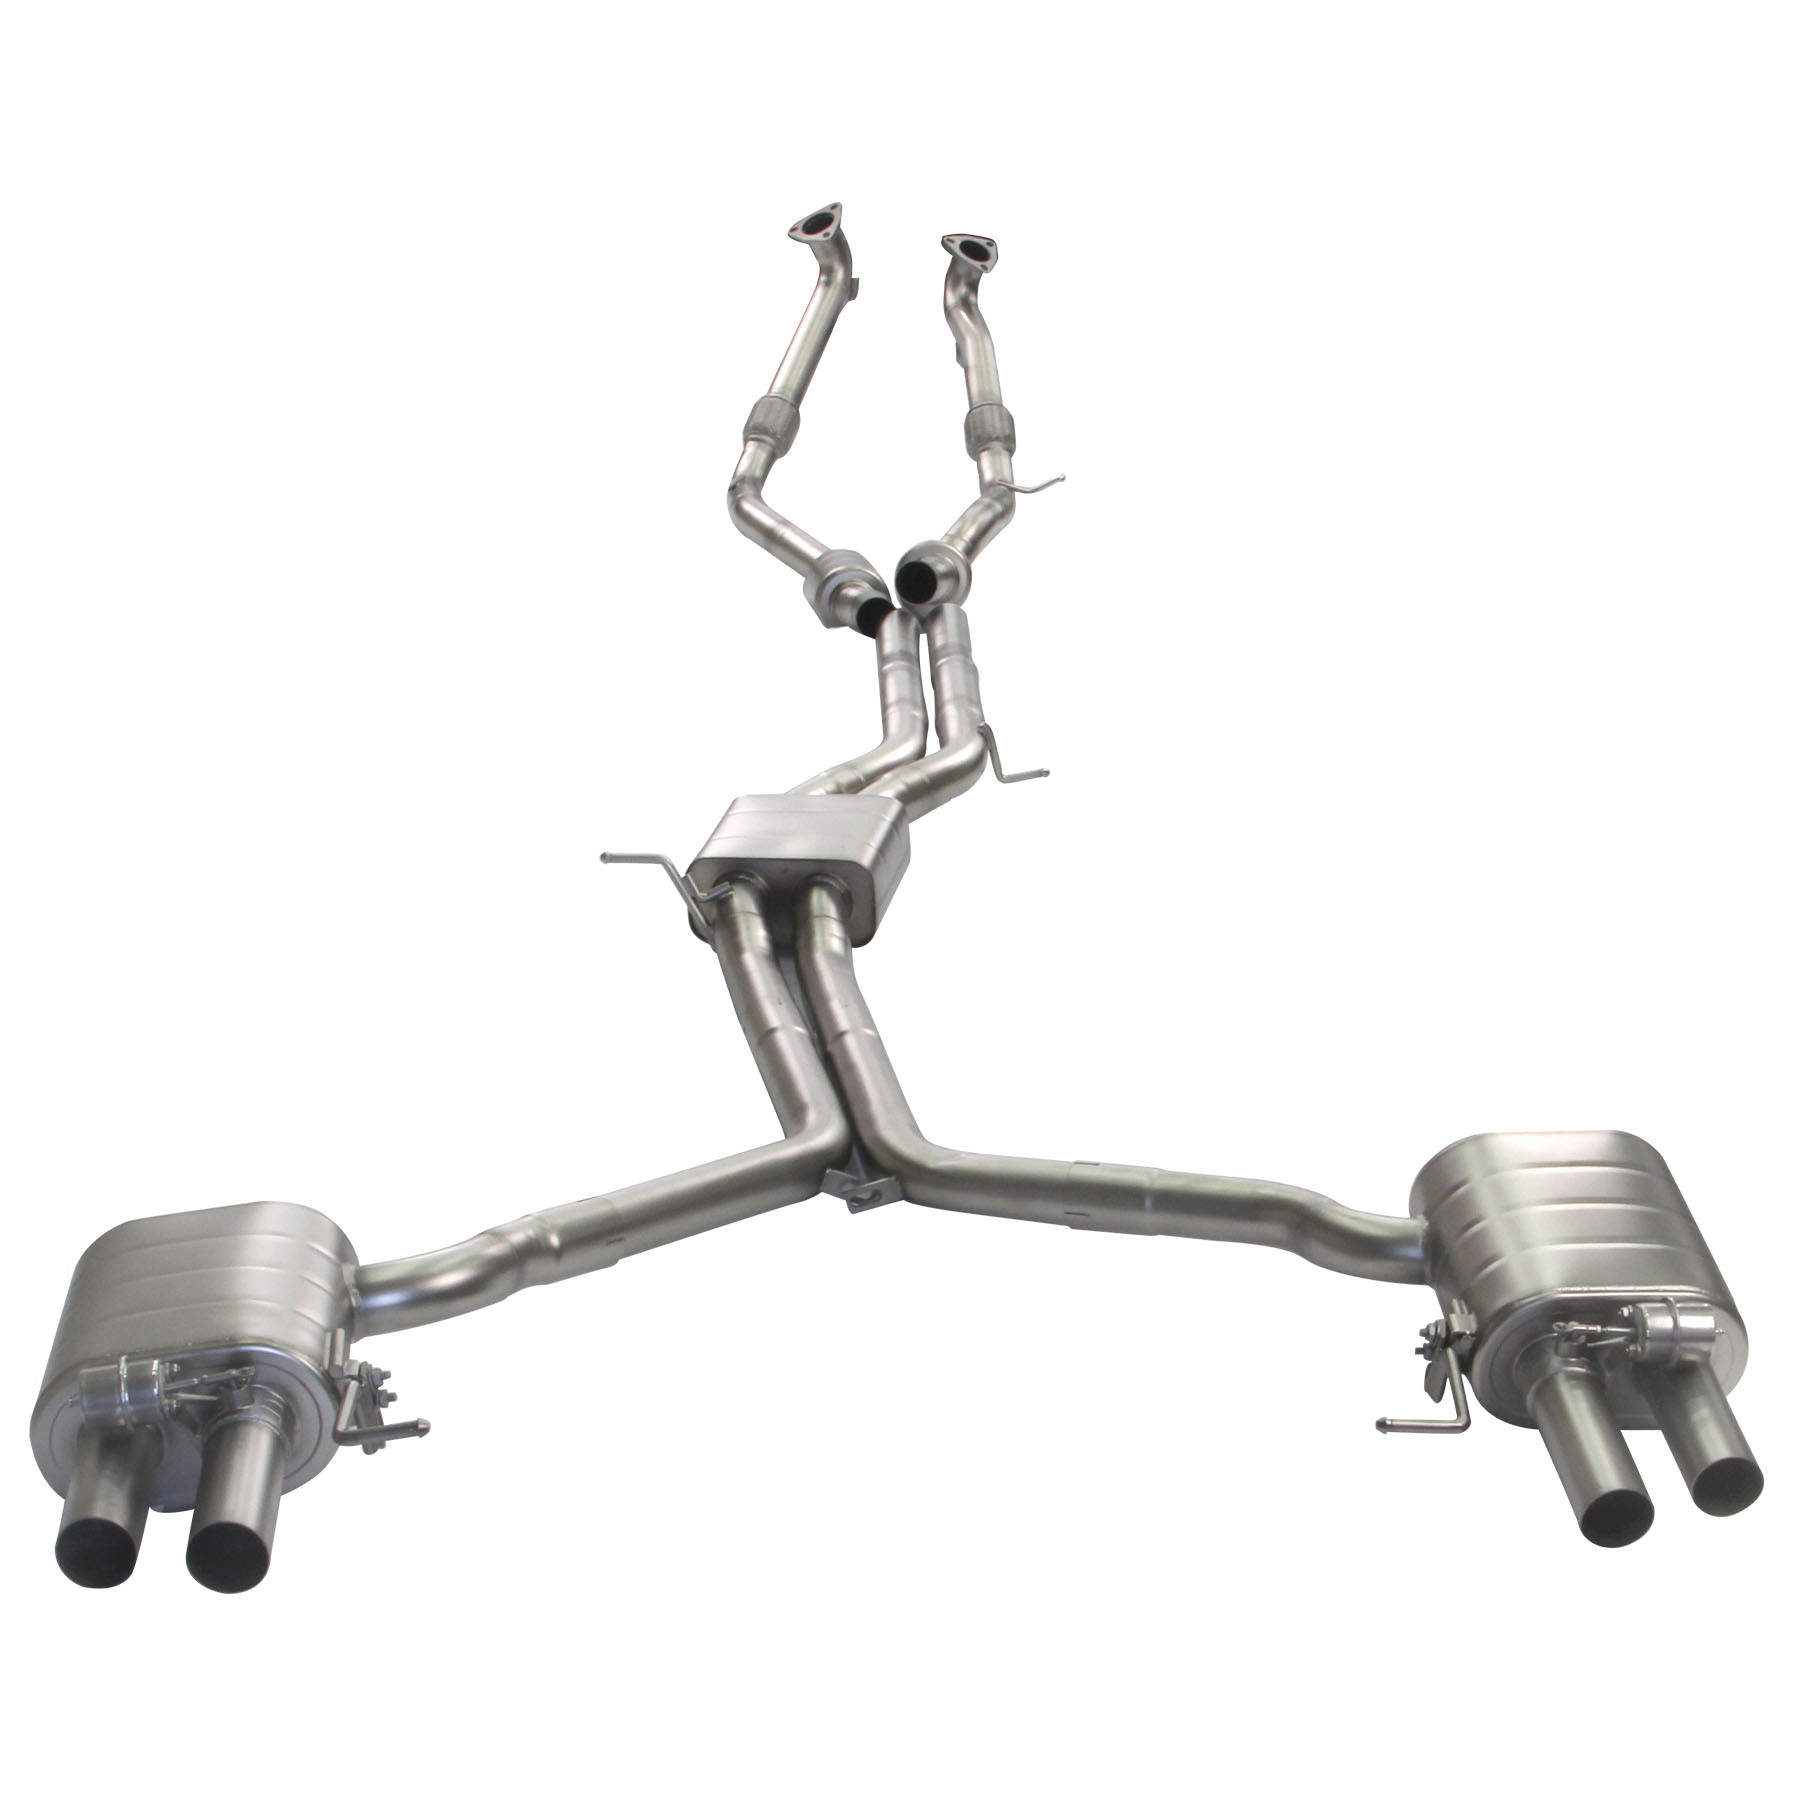 Audi S4 B9 exhaust system